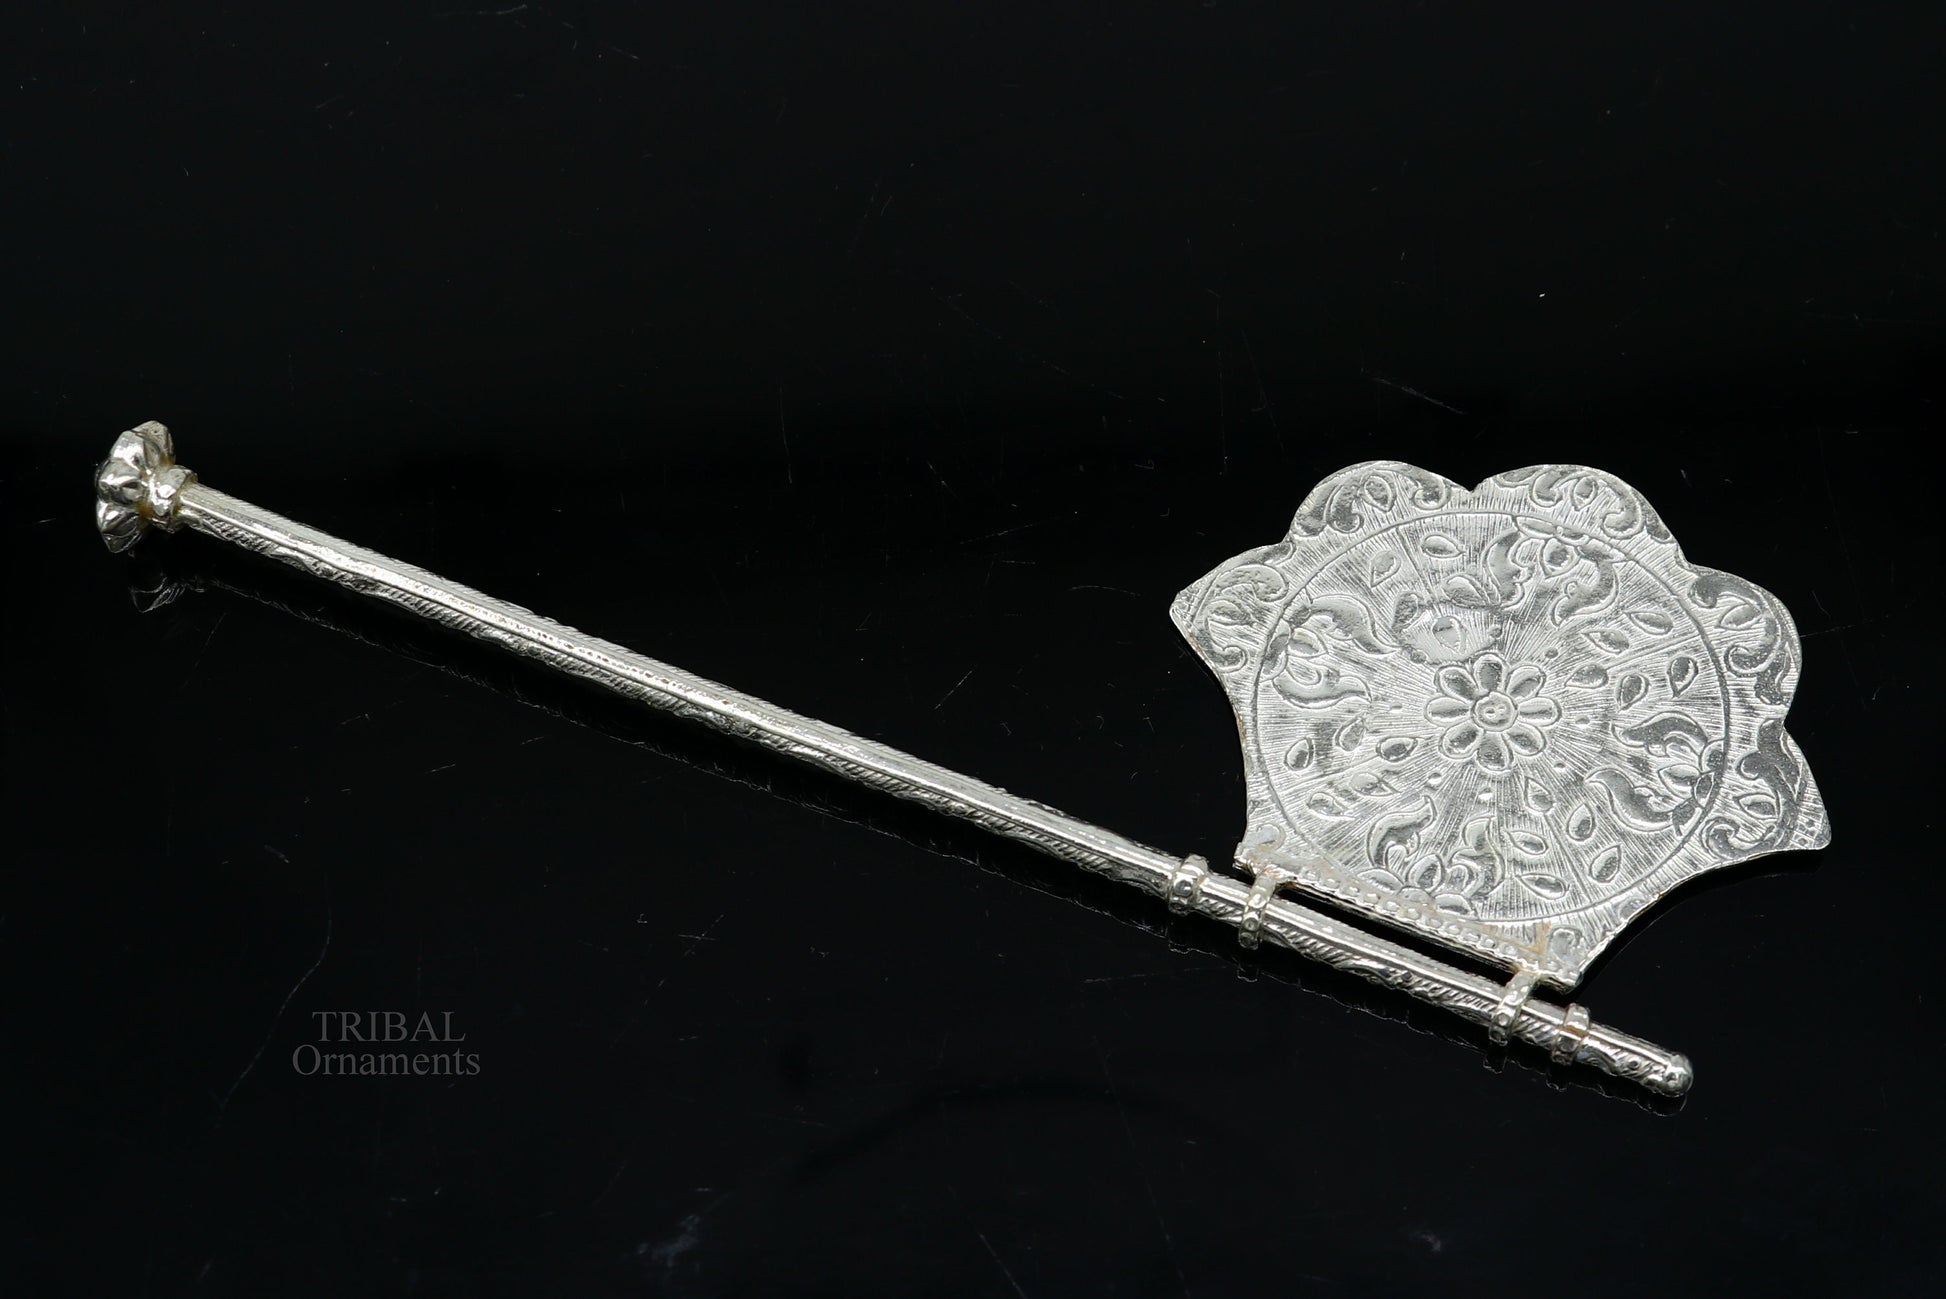 925 sterling silver pankhi, small fan or pankhi for god puja, best gifting to laddu gopala krishna, silver hand fan puja article su687 - TRIBAL ORNAMENTS